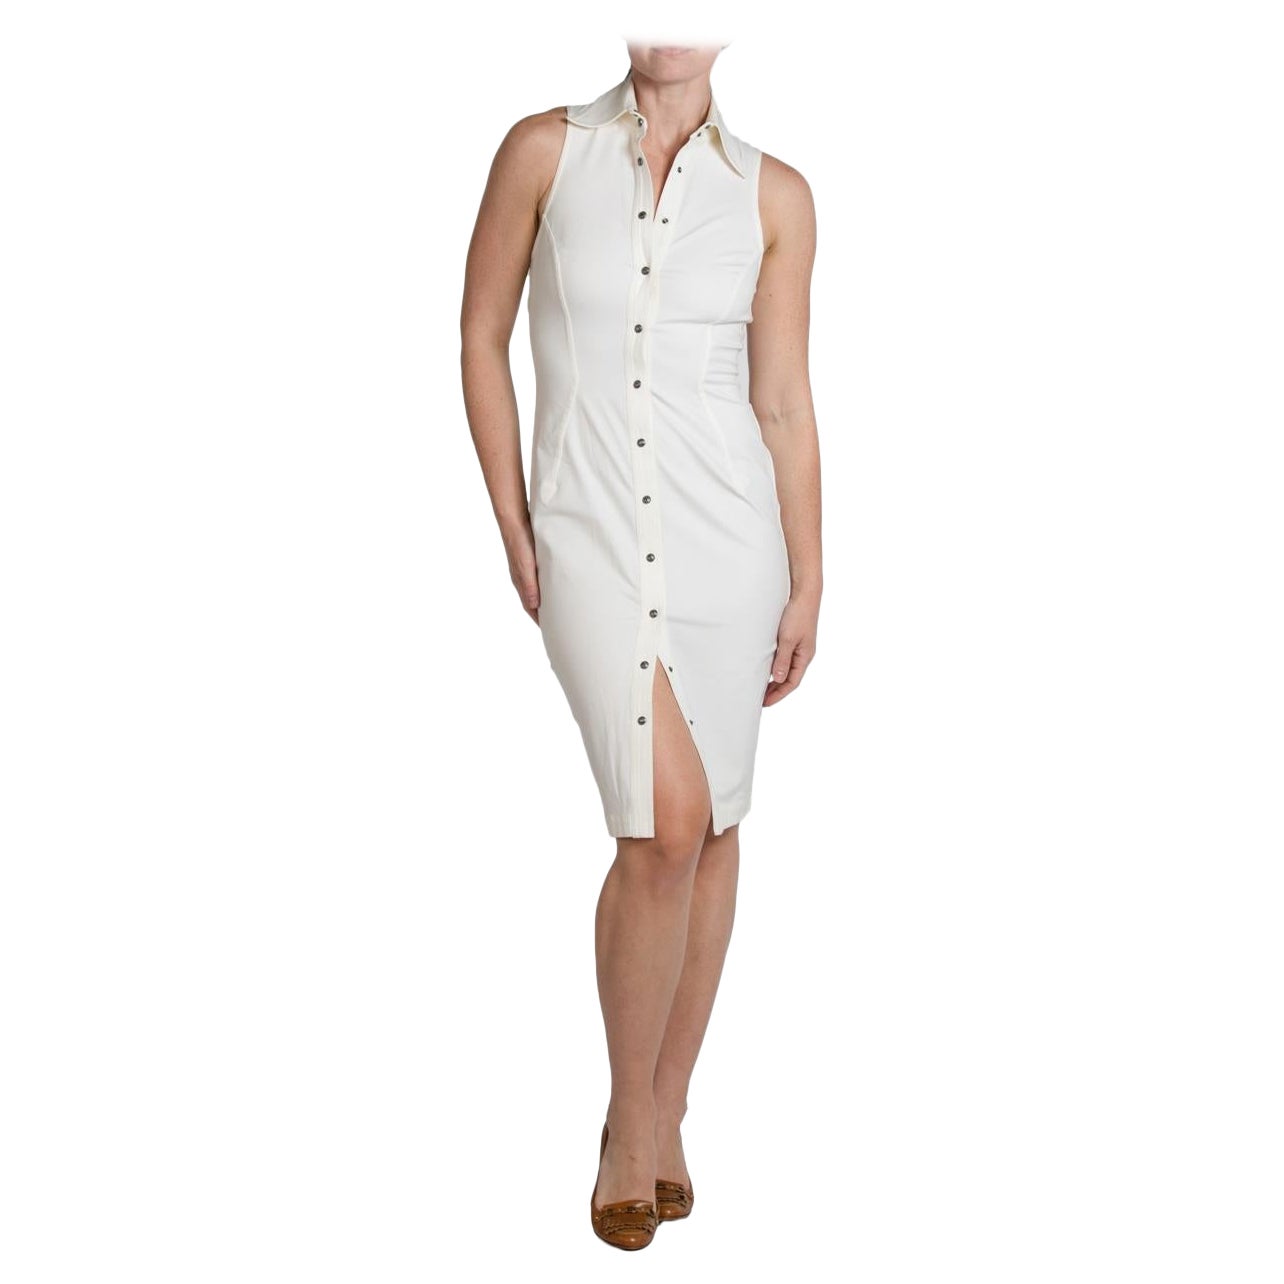 1990S GIANNI VERSACE Off White Rayon & Lycra Sleeveless Dress For Sale